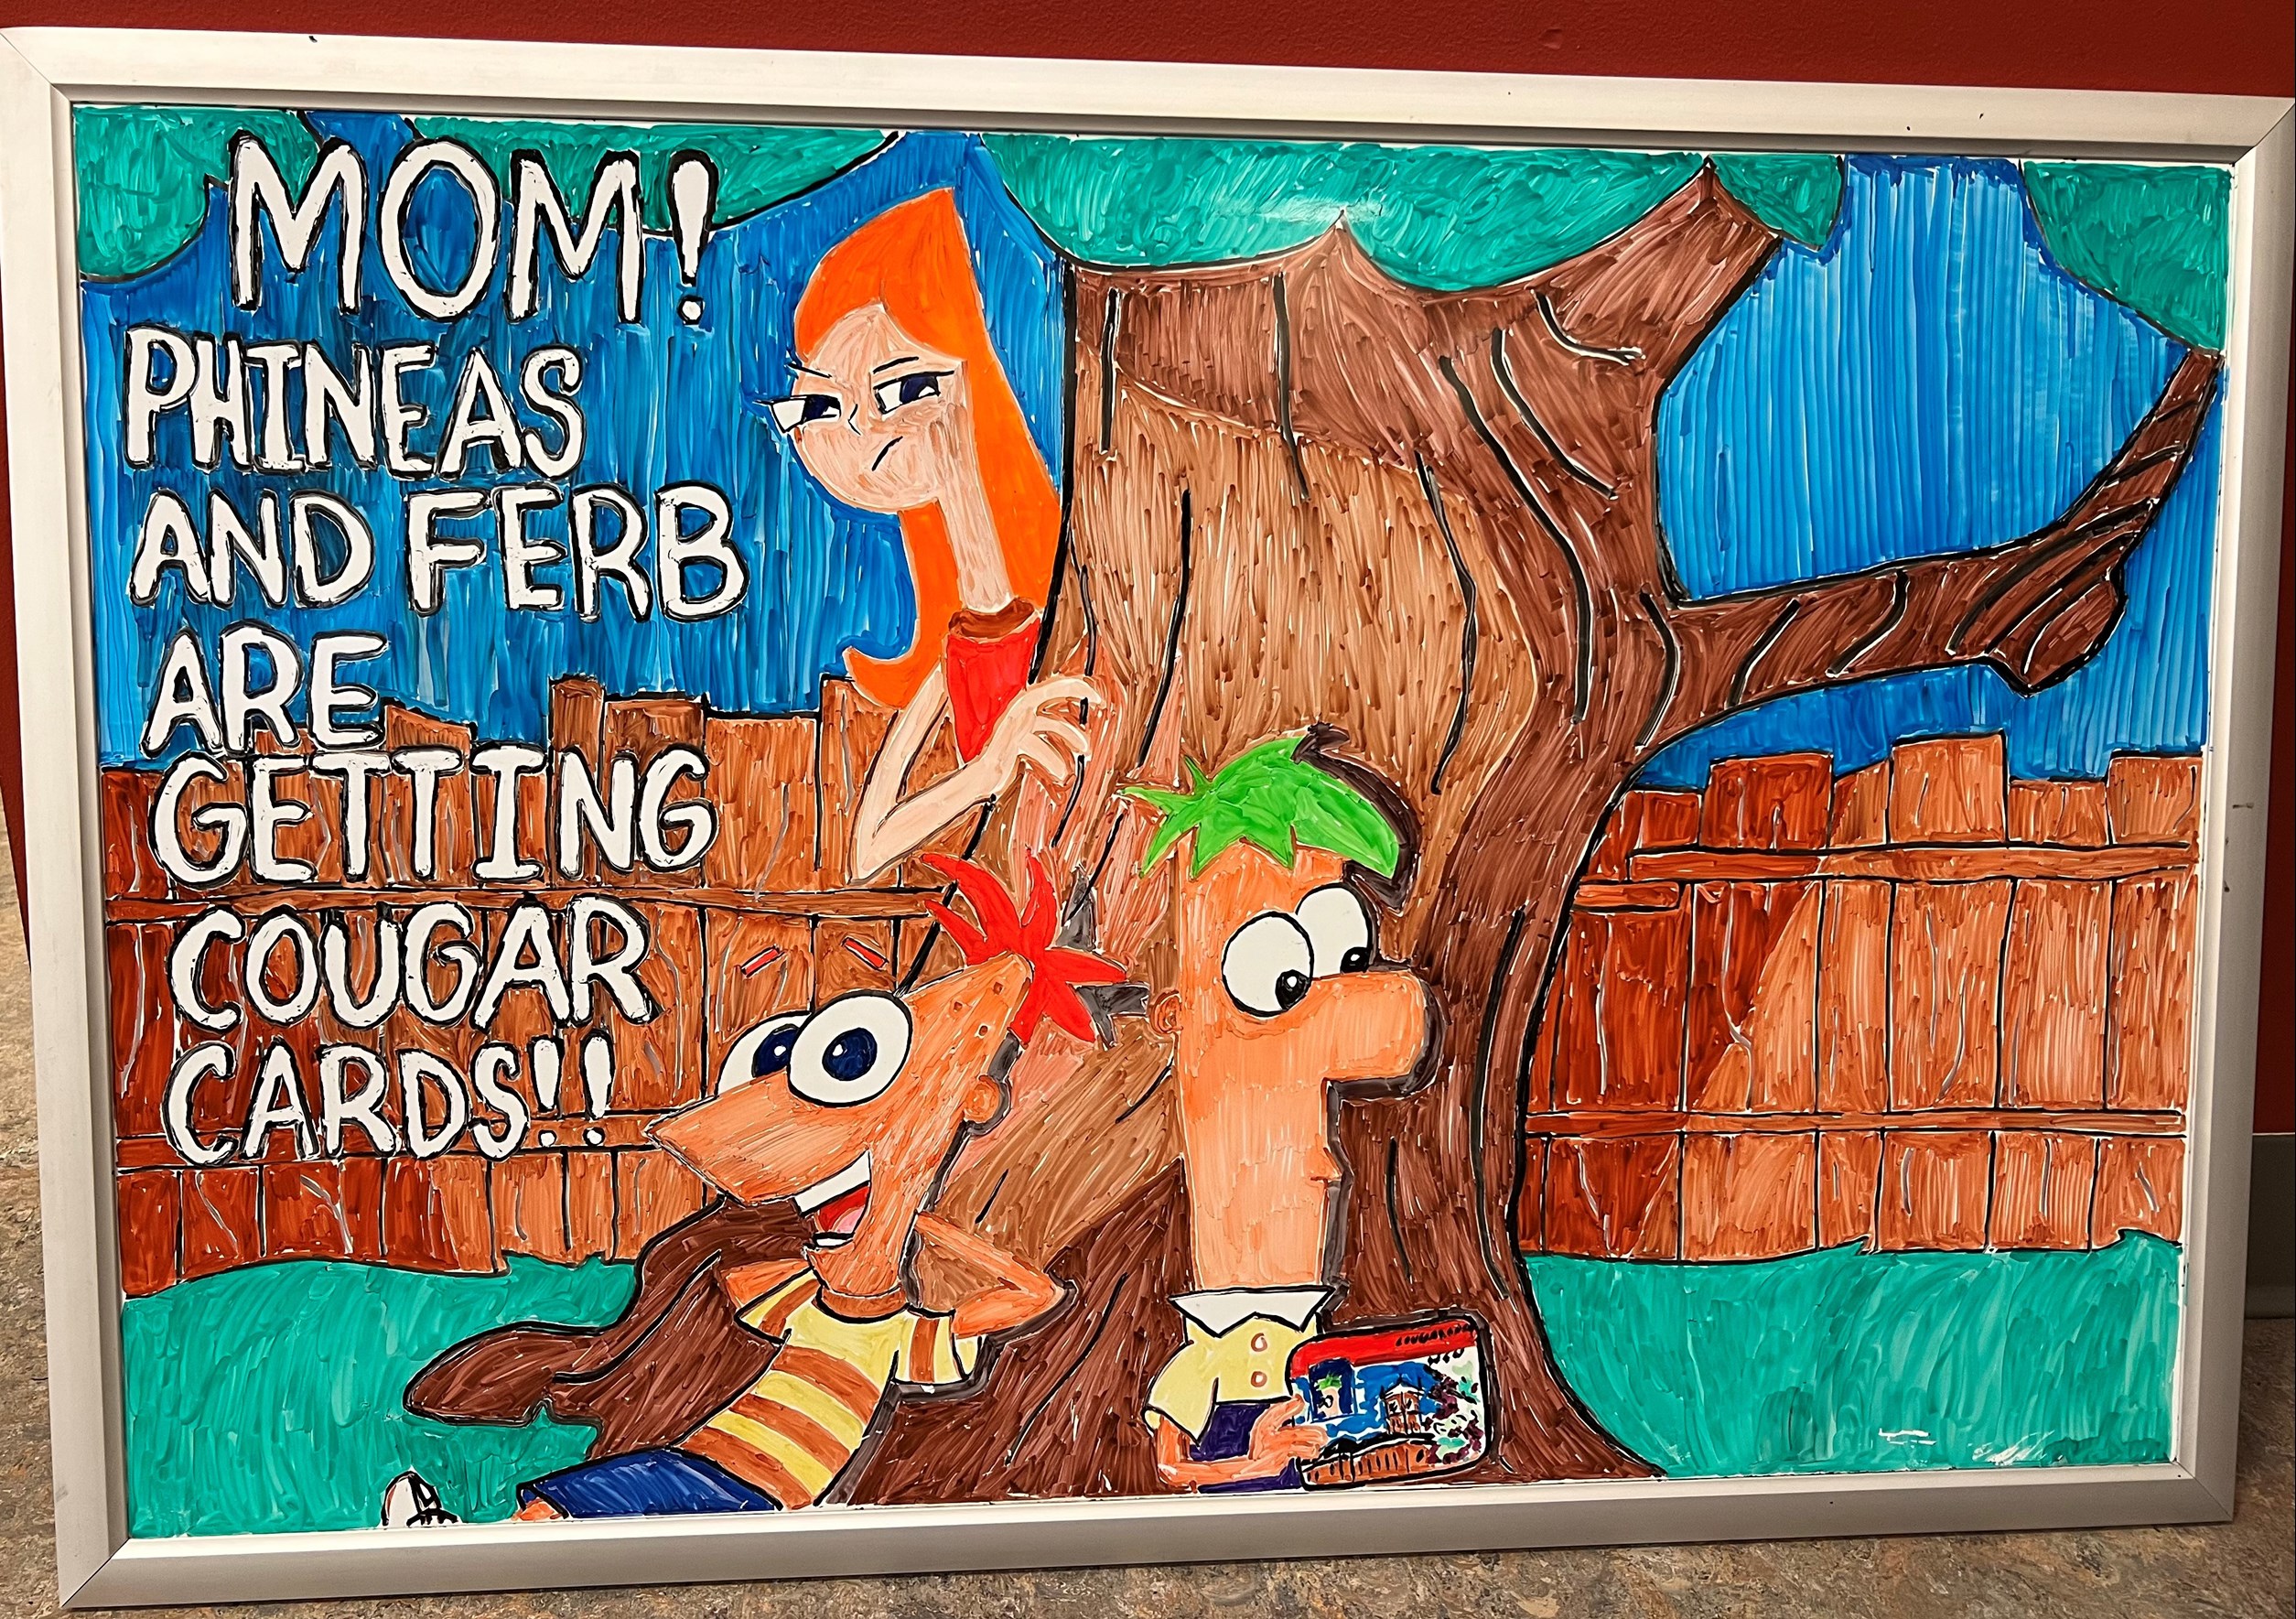 Mom! Phineas and Ferb are Getting CougarCards!